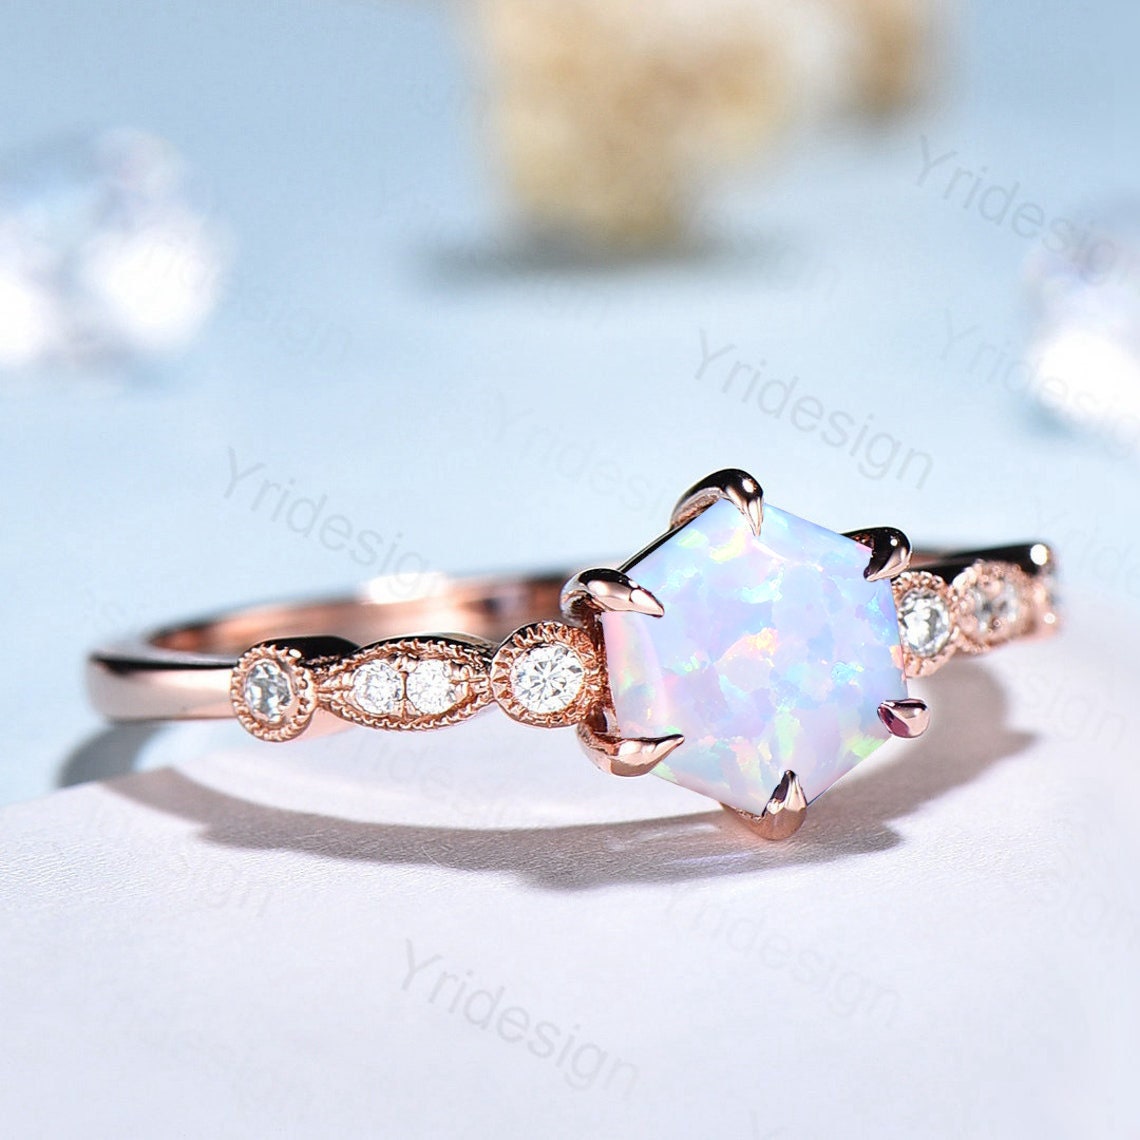 Hexagon opal ring dainty vintage white opal engagement ring art deco 6 prongs sterling silver simulated CZ bride ring for women promise ring - PENFINE